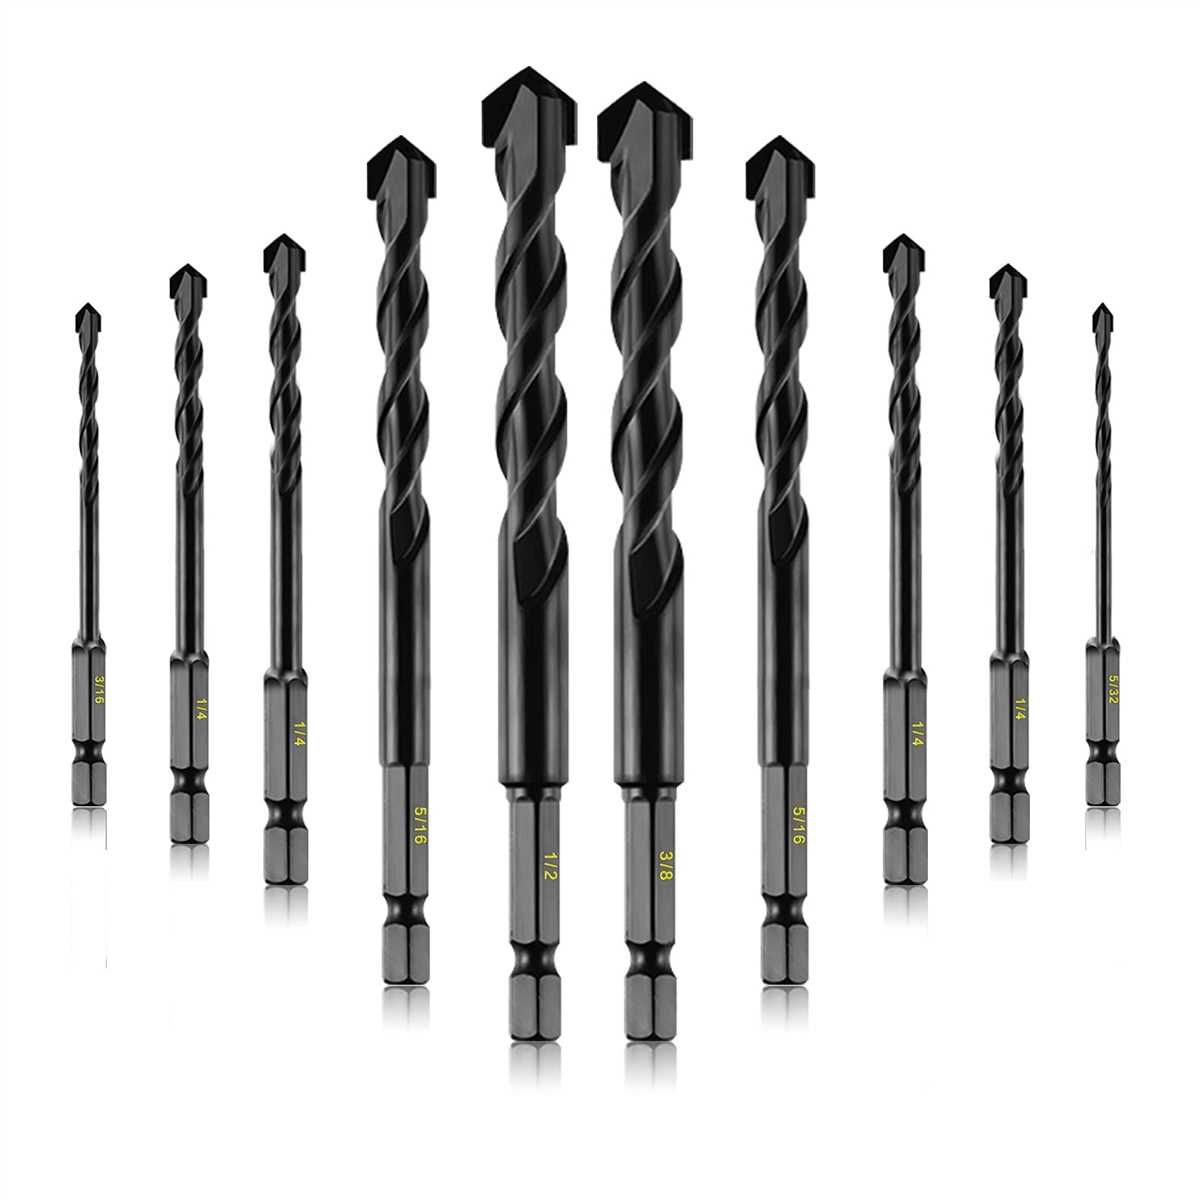 1. Selecting the Right Drill Bit Size